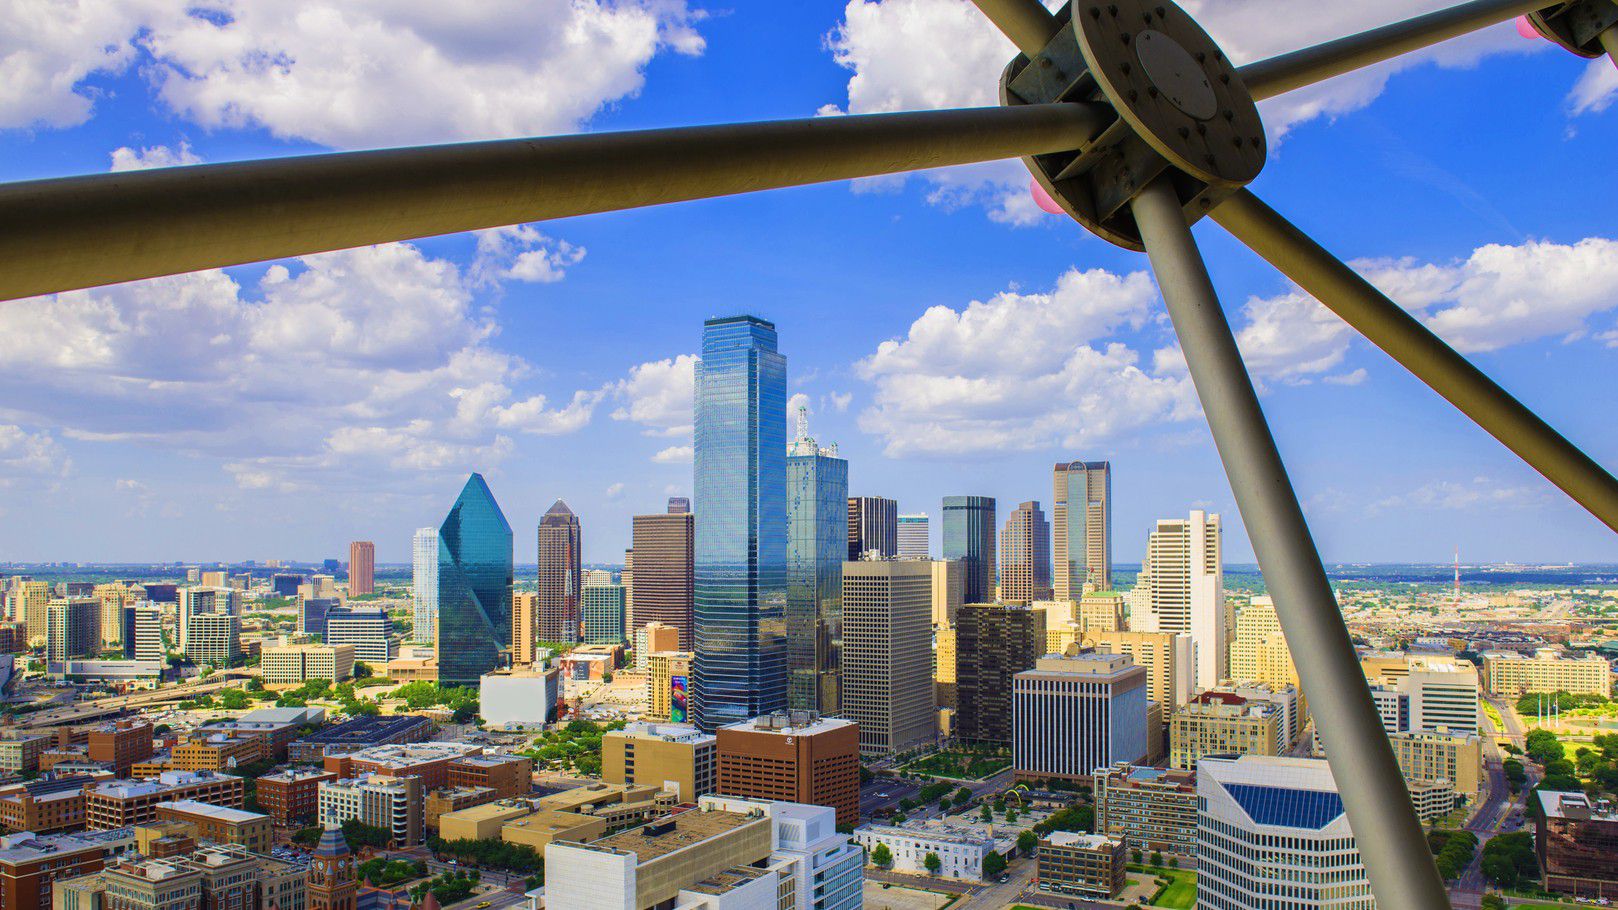 Dallas-Fort Worth cut its year-over-year job deficit by 8,900 in September.